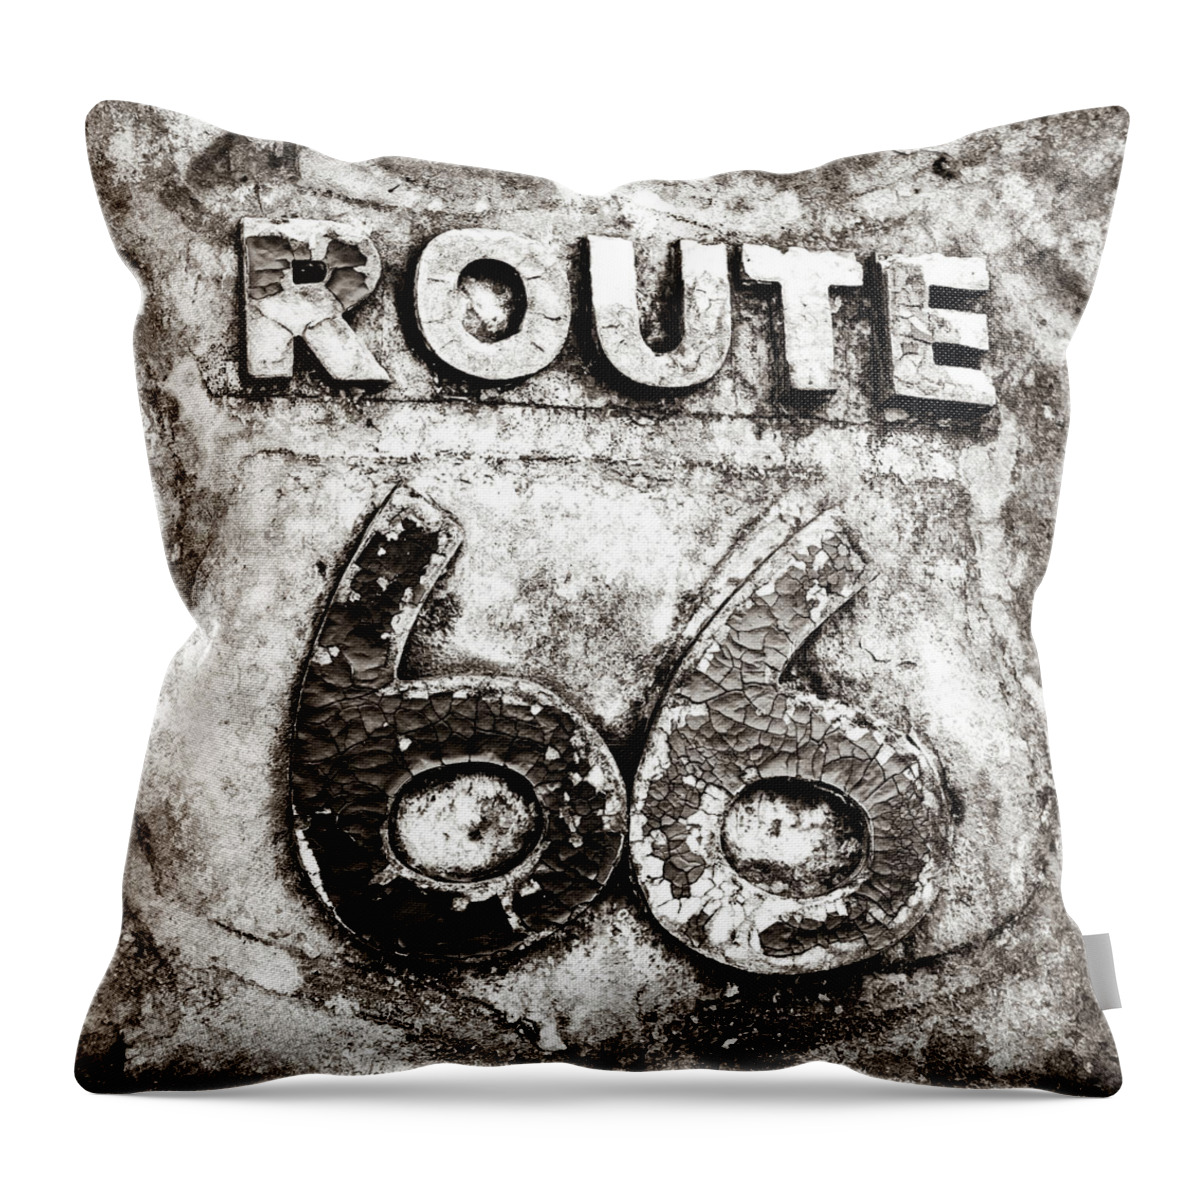 America Throw Pillow featuring the photograph Route 66 Weathered Road Sign - Sepia by Gregory Ballos